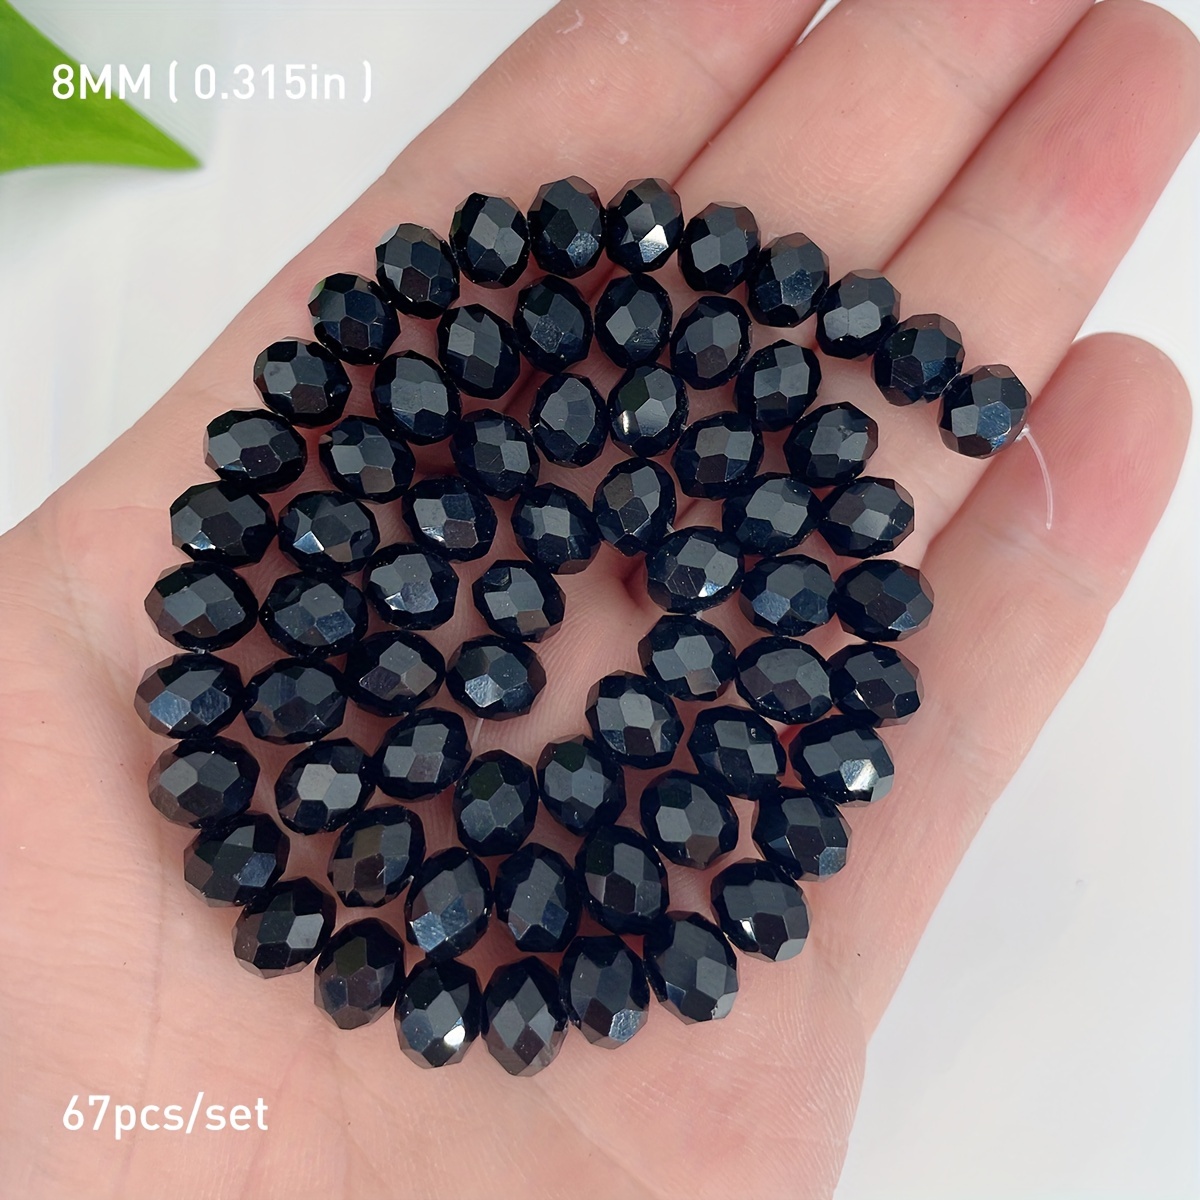 4/6/8/10/12/14MM Black Crystal Stone Beads Rondelle Wheel Faceted Glass  Loose Spacer Beads For Jewelry Making DIY Bracelet Necklace 15in